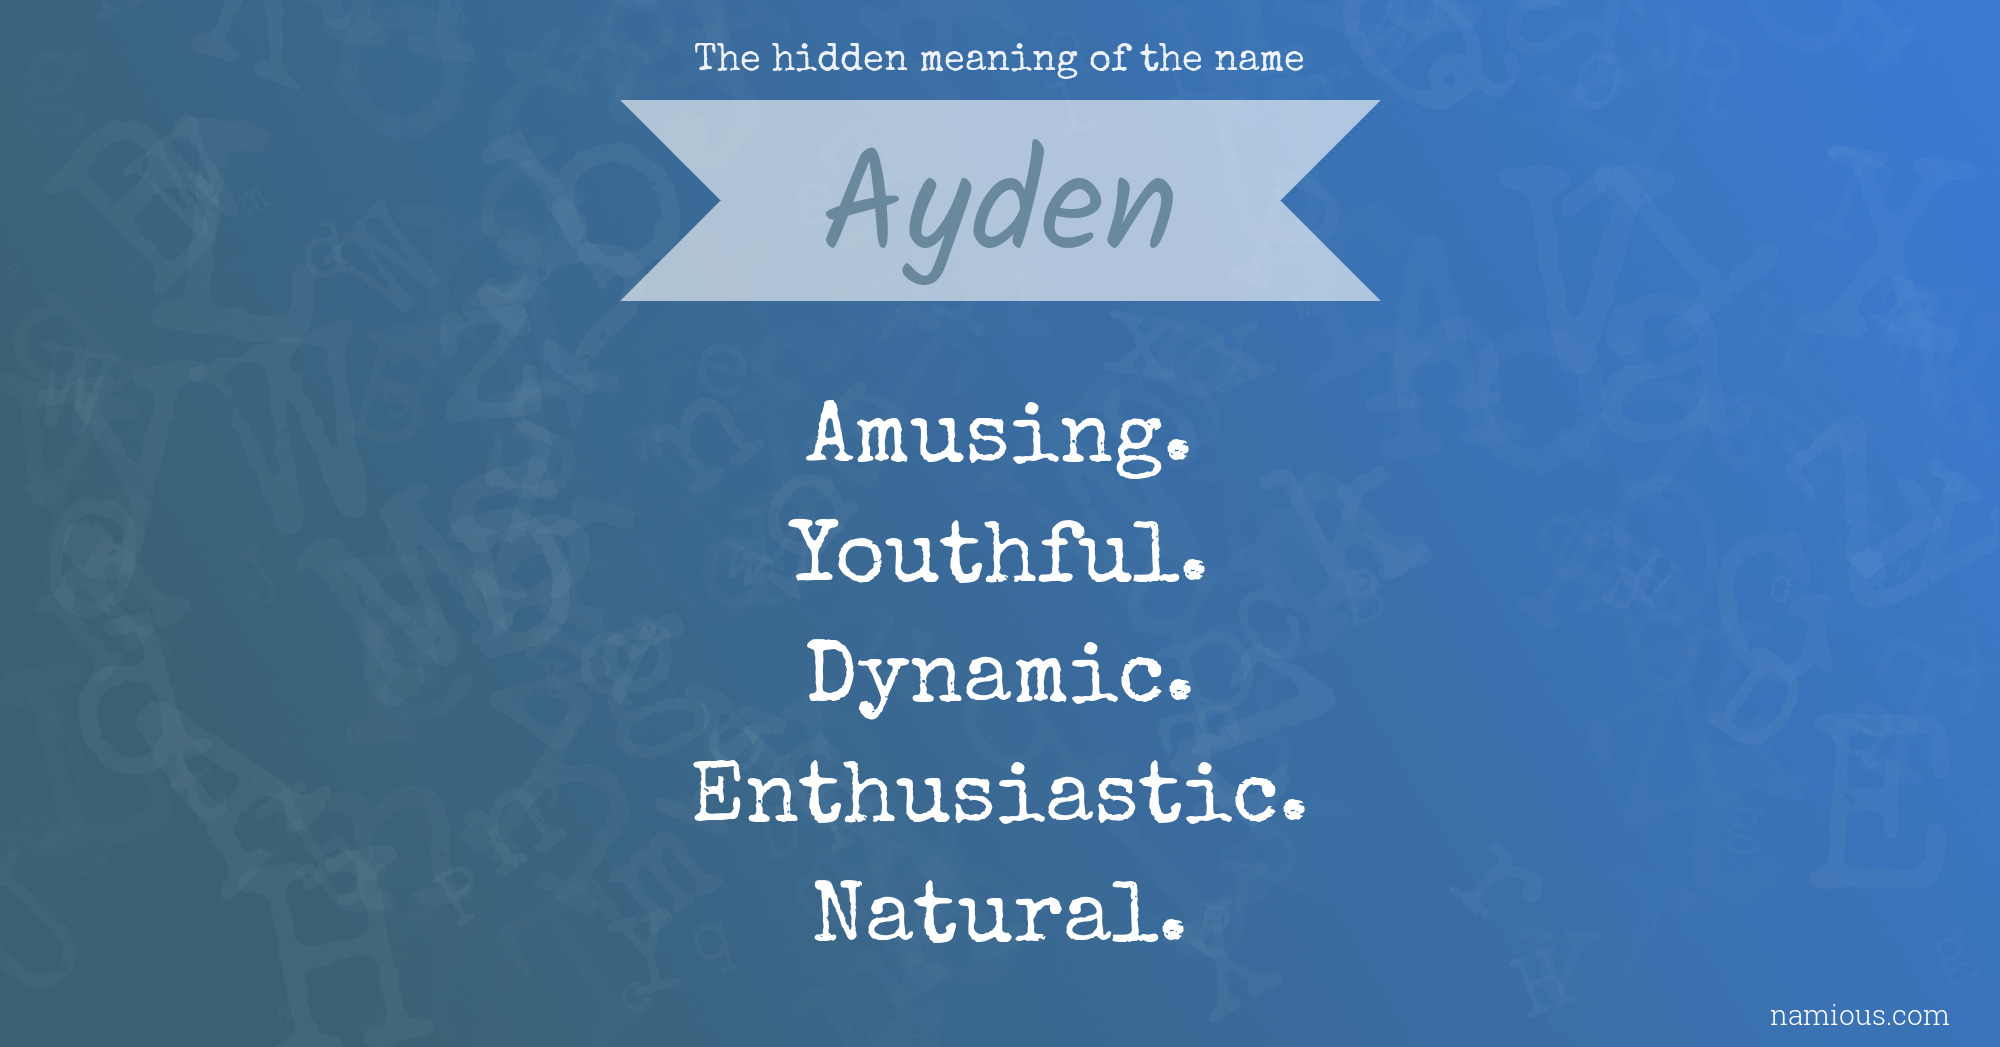 The hidden meaning of the name Ayden